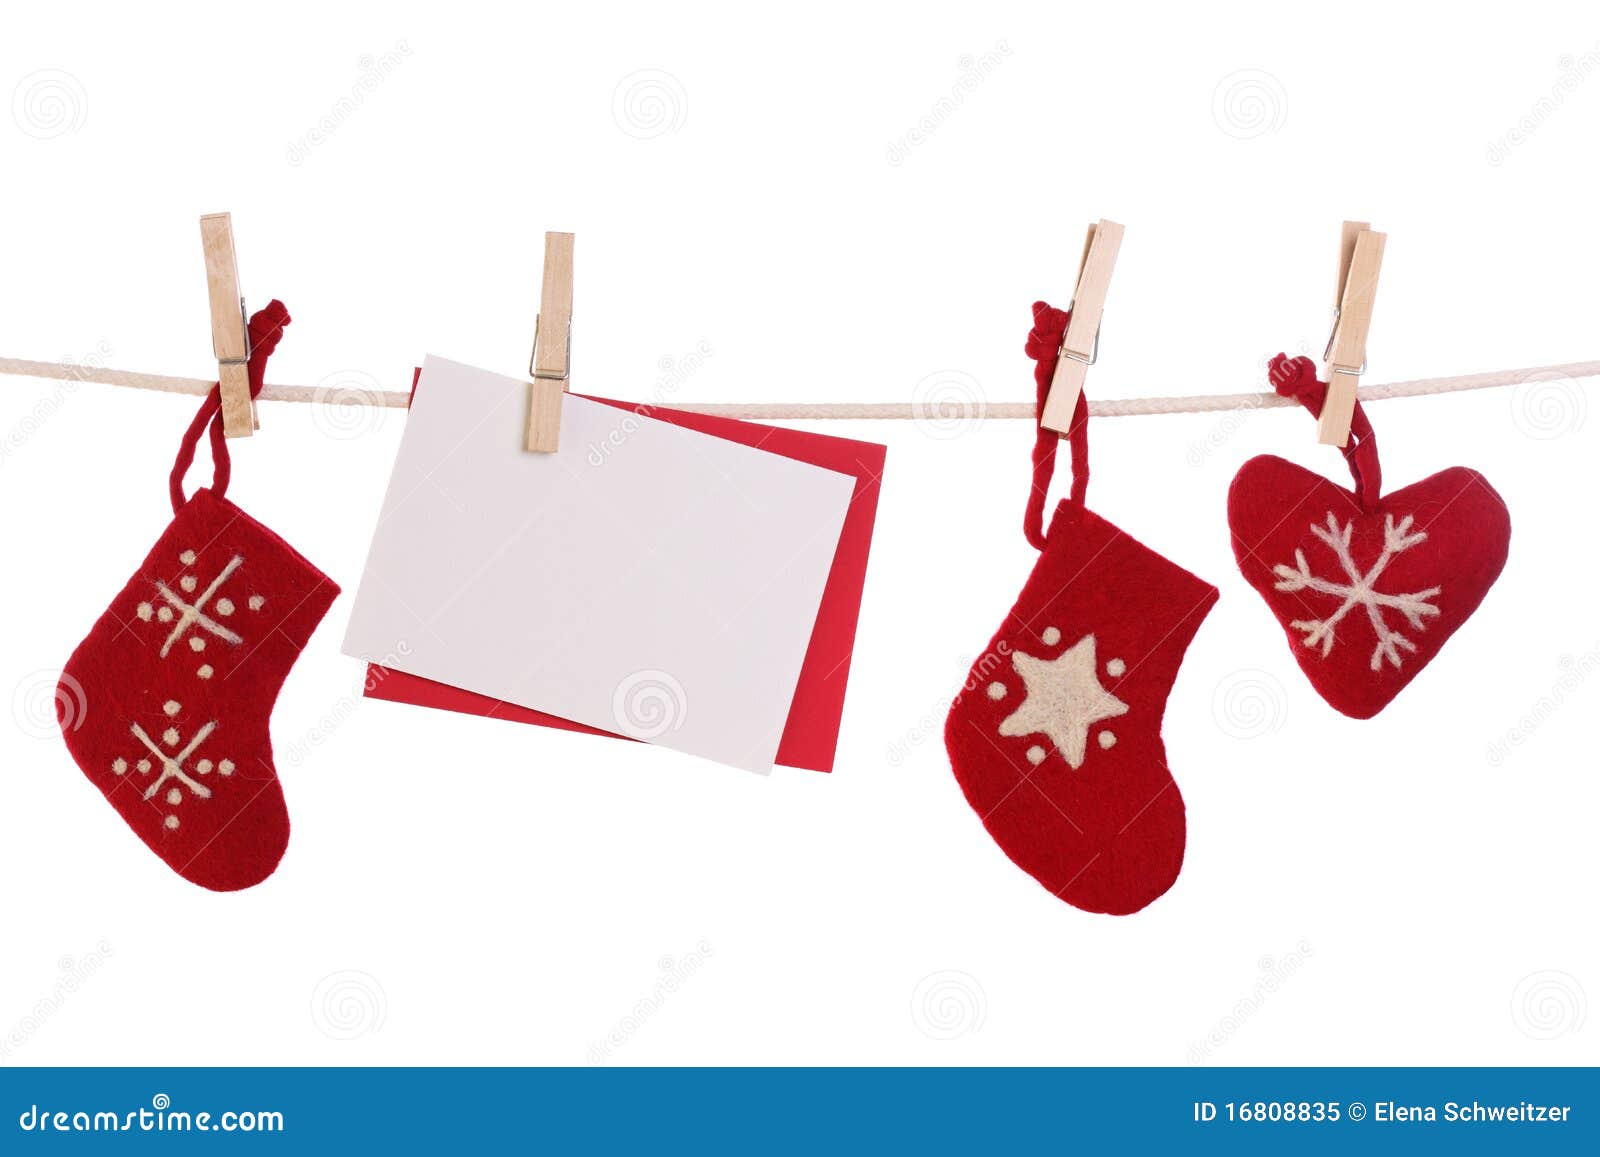  Christmas  Decoration  With Blank  Card Stock Image Image 